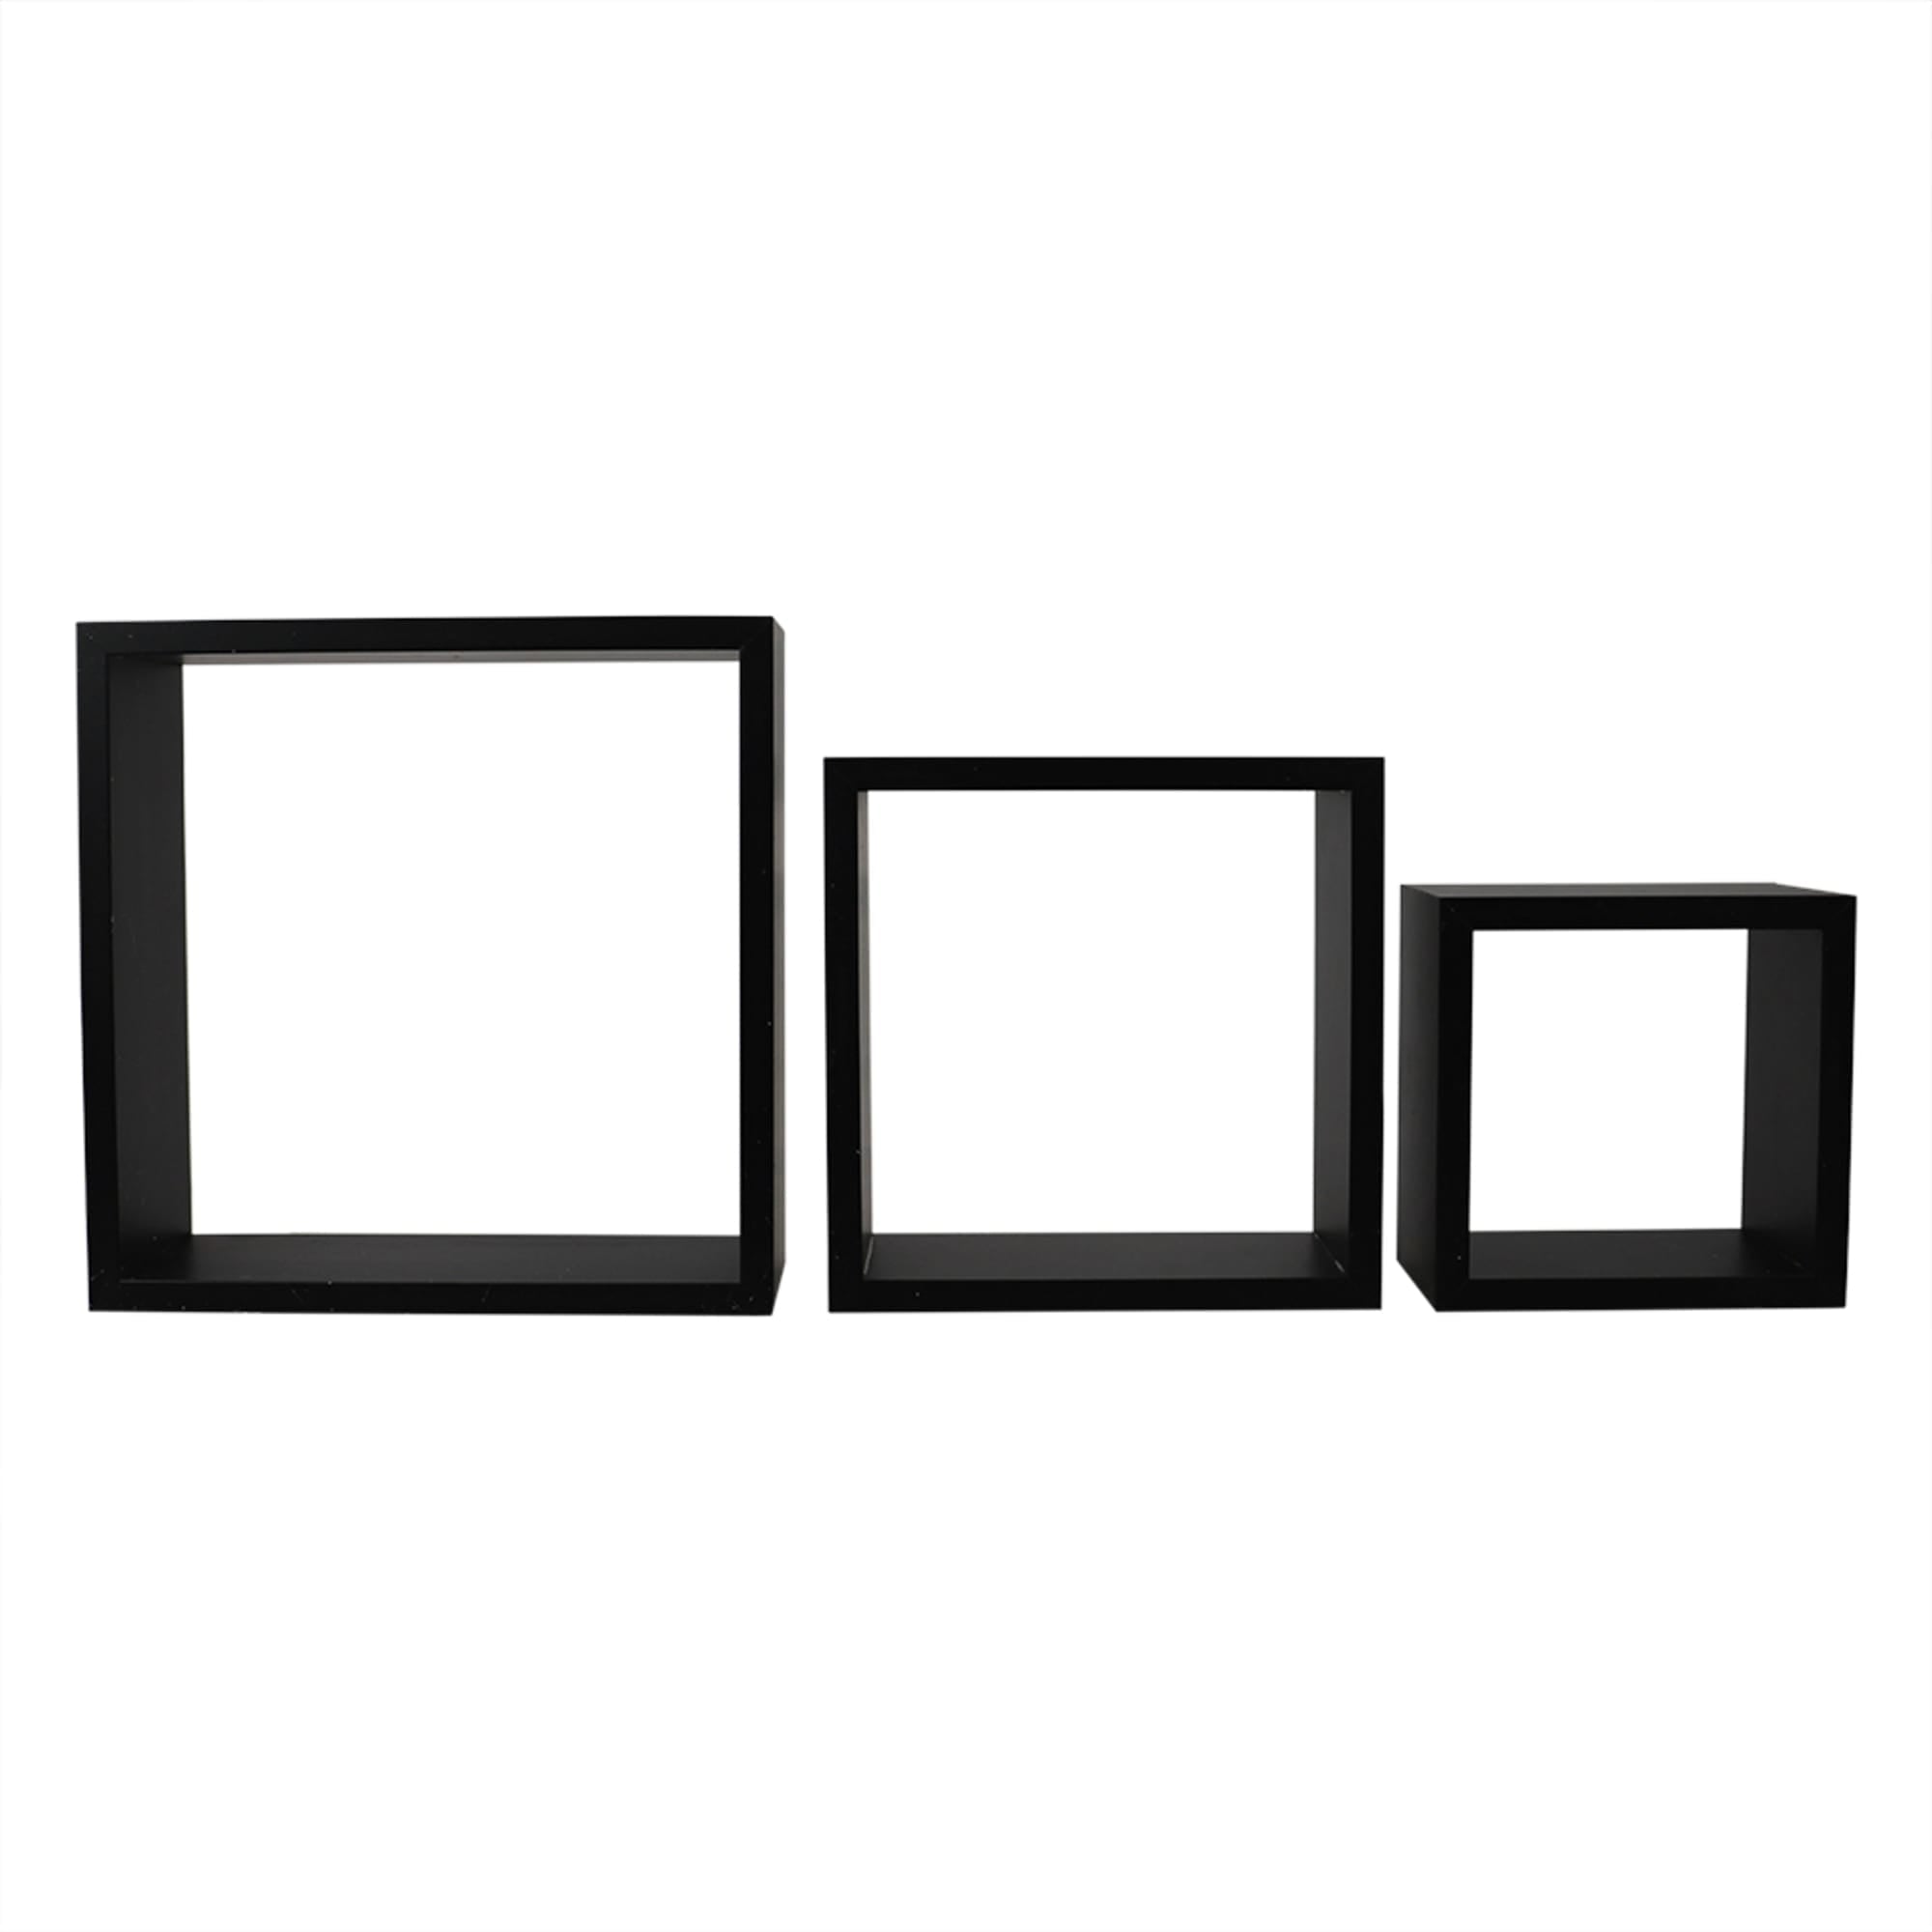 Home Basics 3 Piece MDF Floating Wall Cubes, Black $12.00 EACH, CASE PACK OF 6